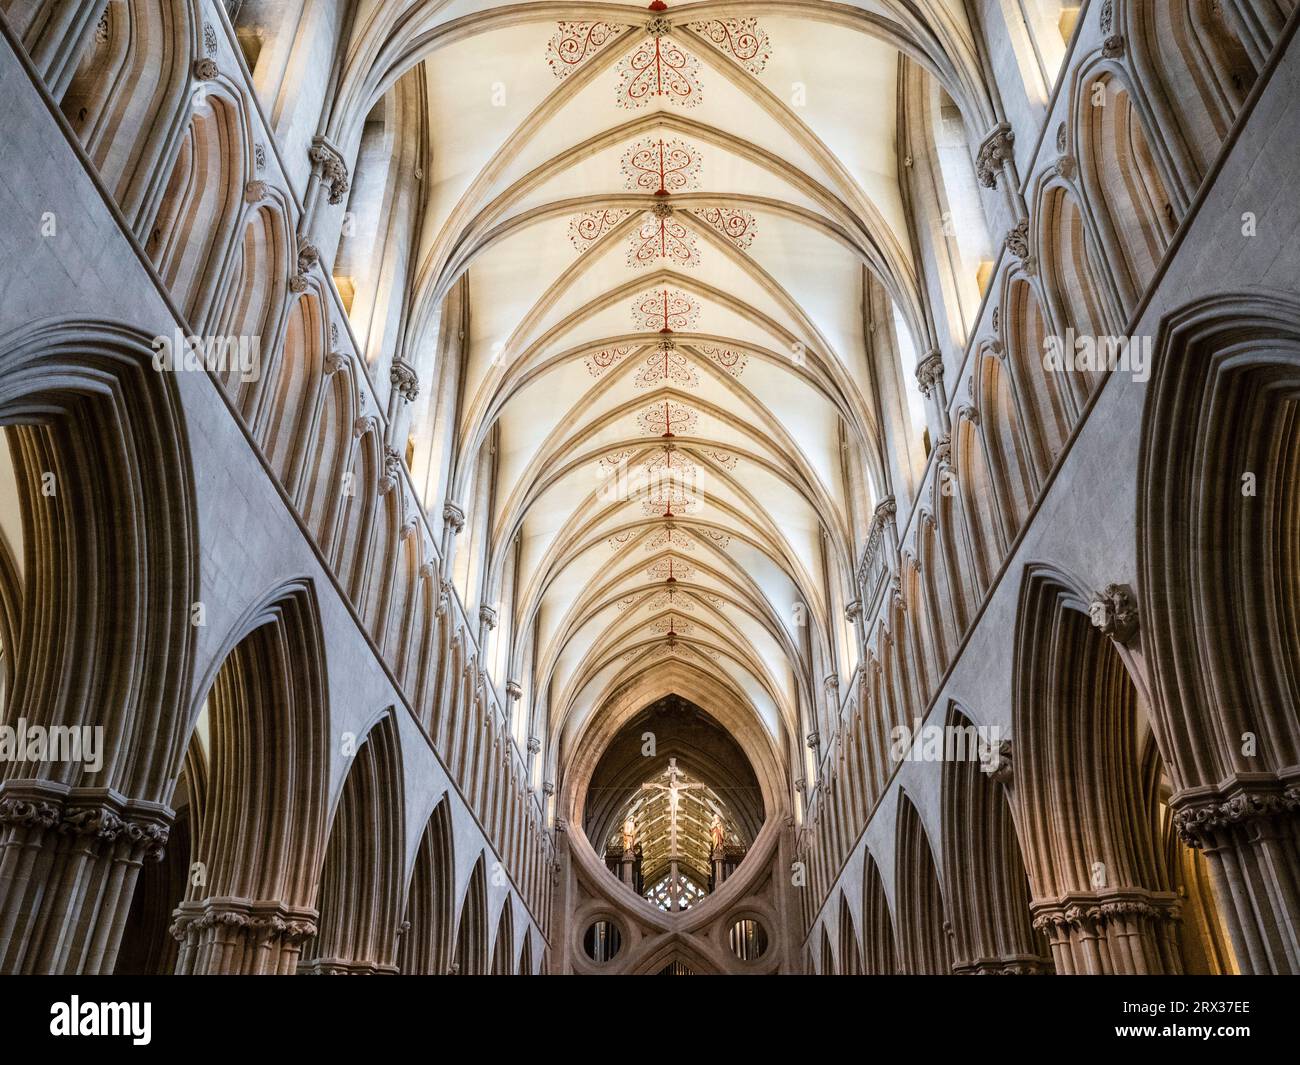 Scisssor arch and ceiling, The Cathedral, Wells, Somerset, England, United Kingdom, Europe Stock Photo